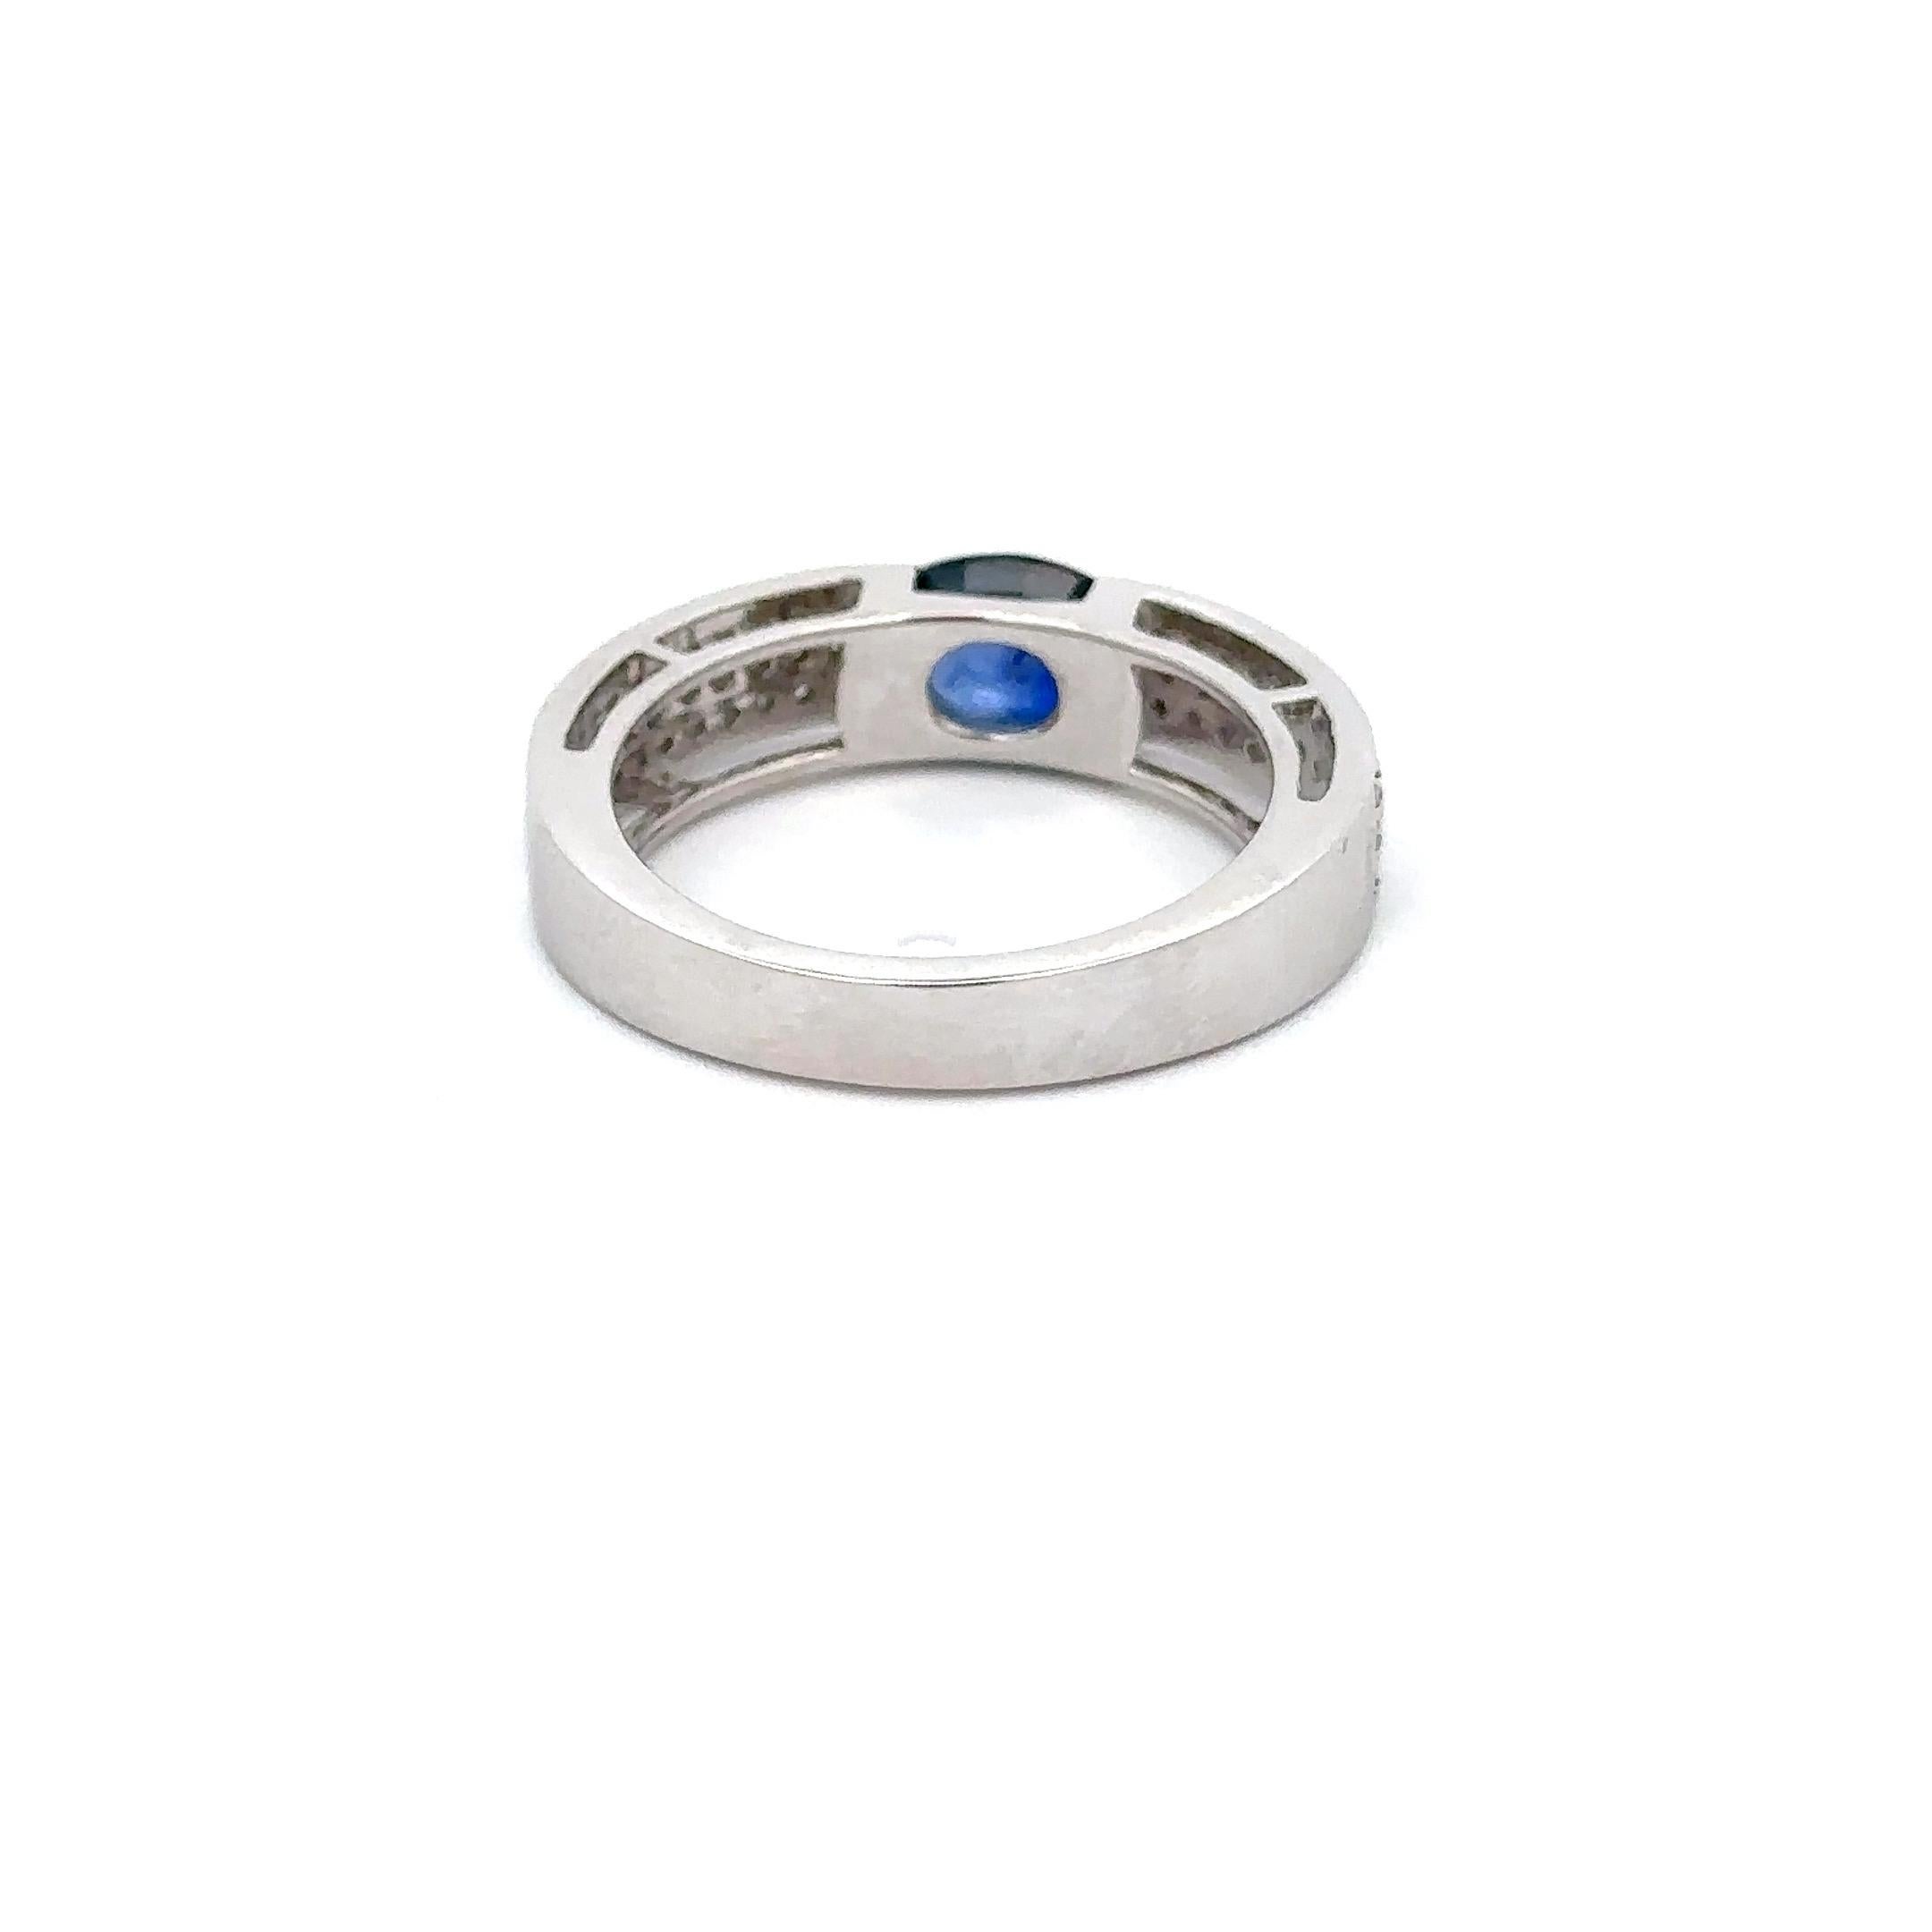 For Sale:  Unisex Blue Sapphire Diamond Engagement Band Ring in 18k Solid White Gold 7